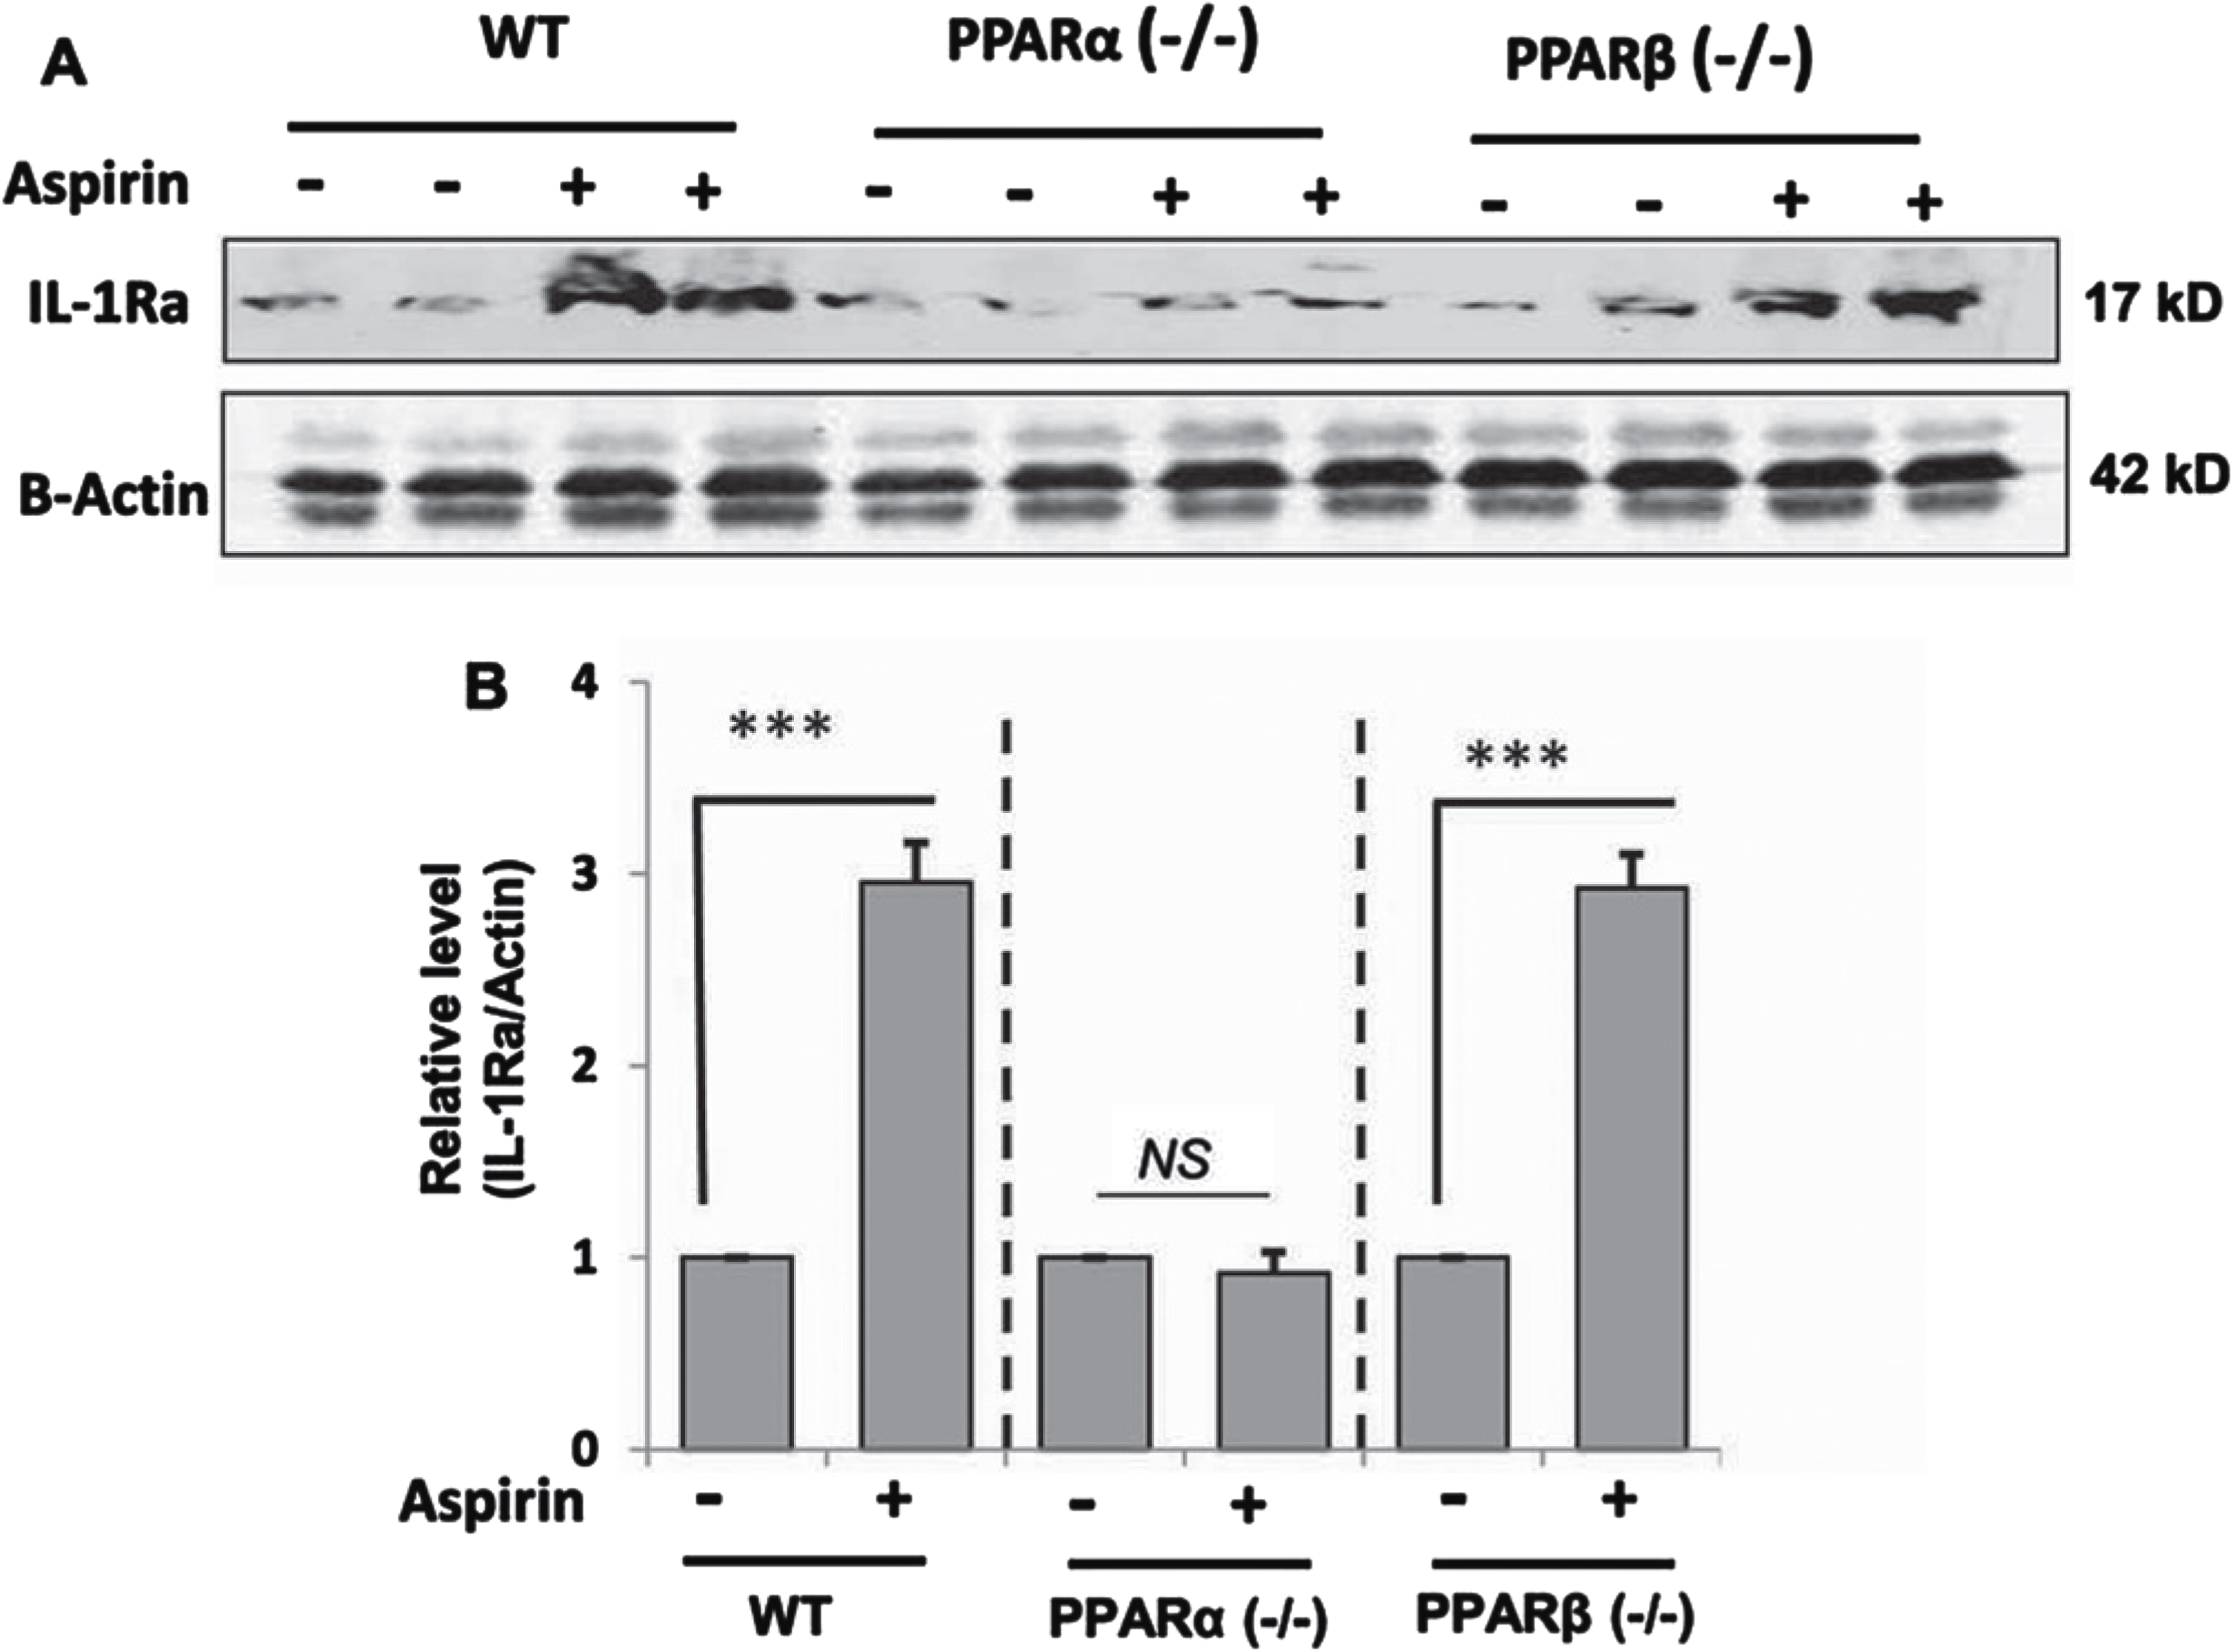 Oral aspirin increases IL-1Ra protein in vivo in the cortex via PPARα. WT, PPARα–/–, and PPARα–/– mice (n = 6 in each group; 8–10 week old) were treated with aspirin (2 mg/kg/day) orally for 7 days via gavage followed by monitoring the protein level of IL-1Ra in the cortex by western blot (A). Actin was run as a loading control. Bands were scanned and values (IL-1Ra/Actin) presented as relative to untreated control in each group (B). Results are mean±SEM of six mice per group. ***p < 0.001; NS, not significant. Significance of mean between control and aspirin-treated groups was analyzed with a two-tailed paired t-test.